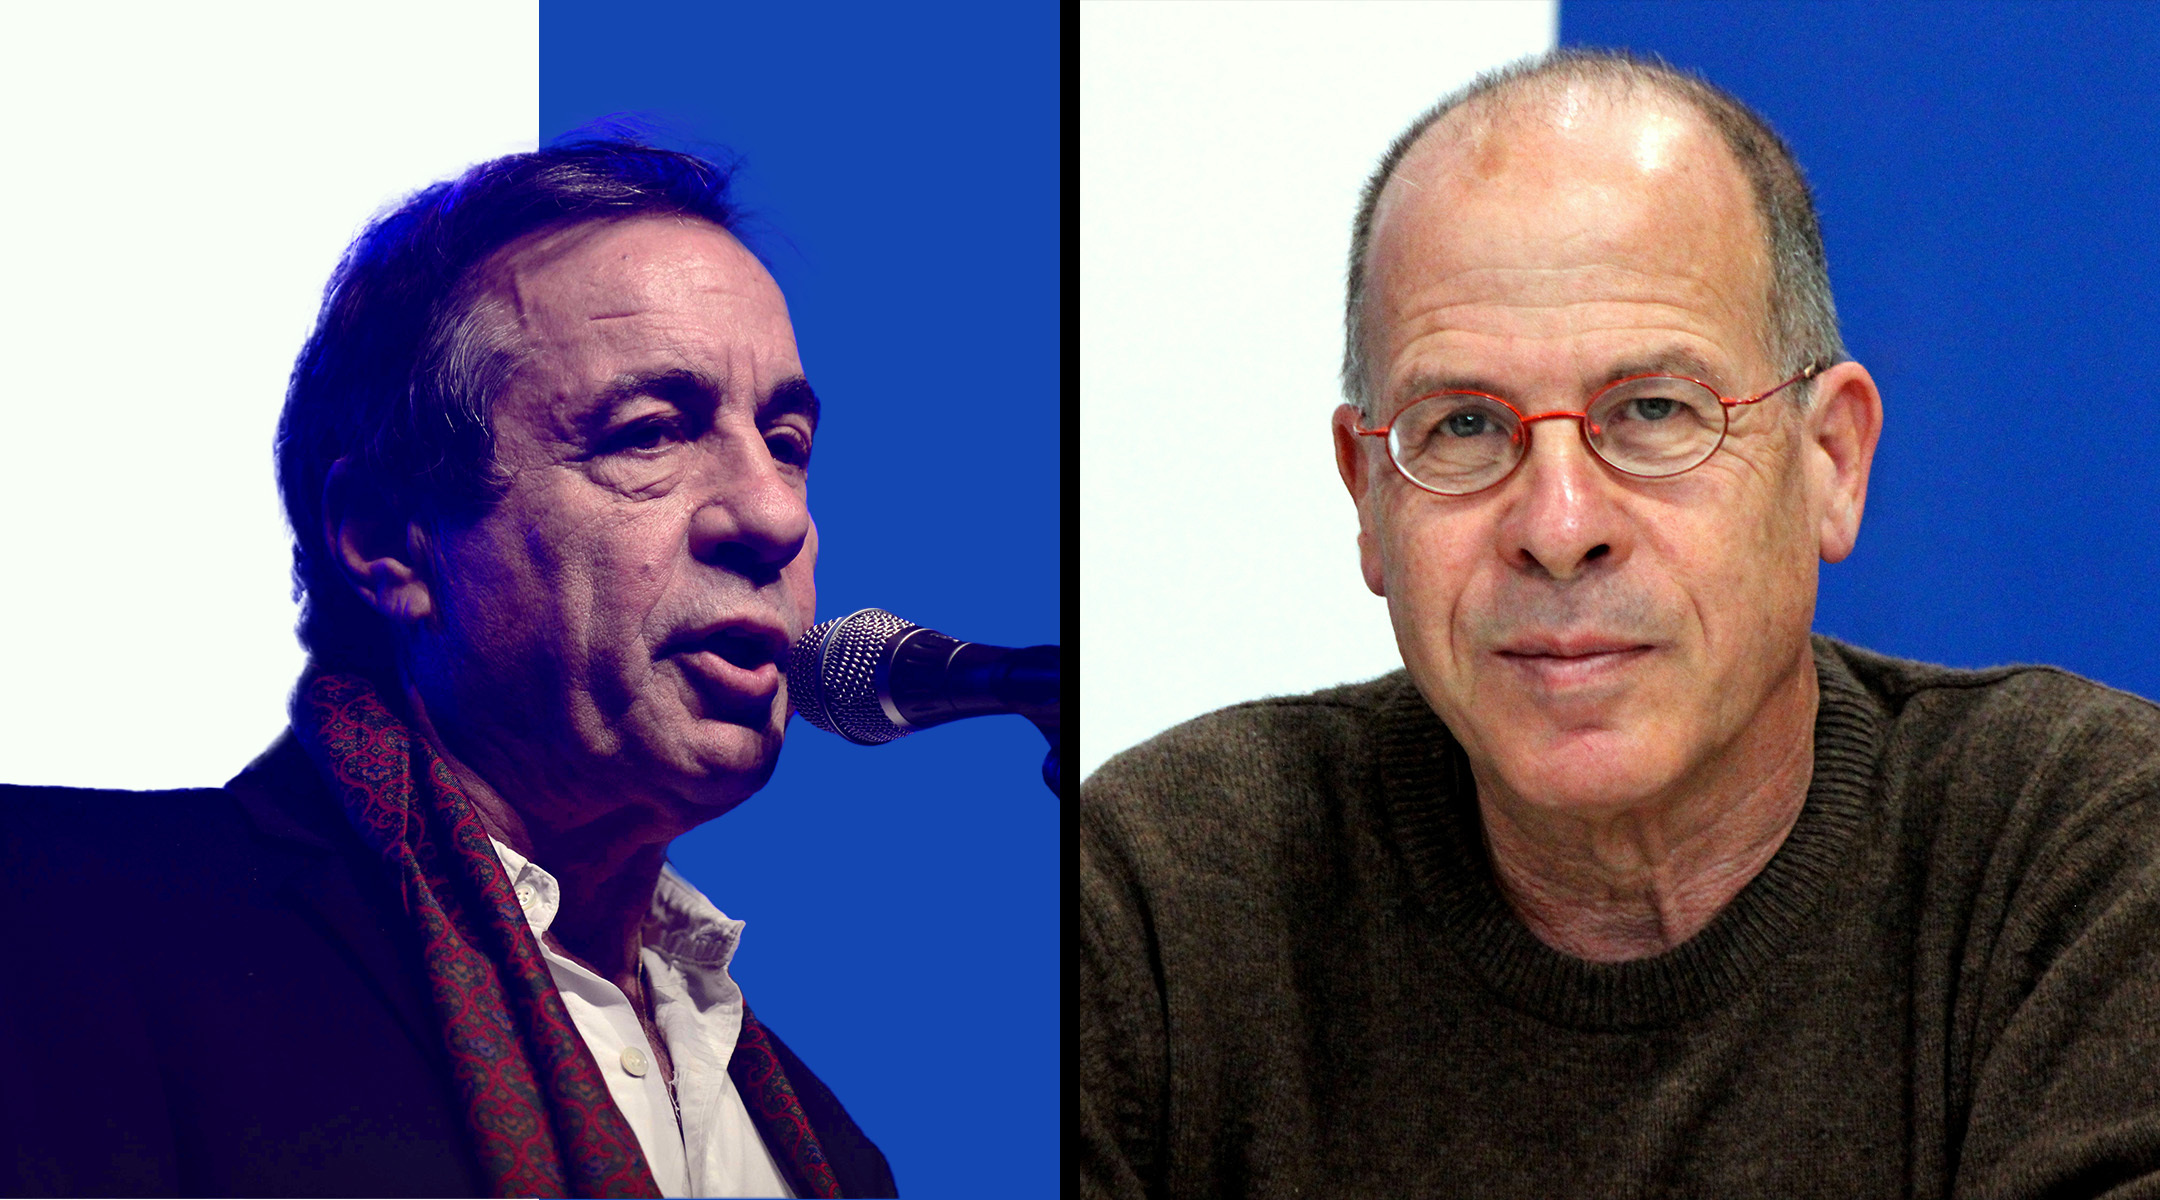 Yehonatan Geffen, a journalist, songwriter and actor, and Meir Shalev, an award-winning novelist, were part of the first generation of Israeli artists and entertainers to grow up after the state gained its independence. (Geffen: Tomer Neuberg/Flash90. Shalev: Lesekreis/Wikipedia)